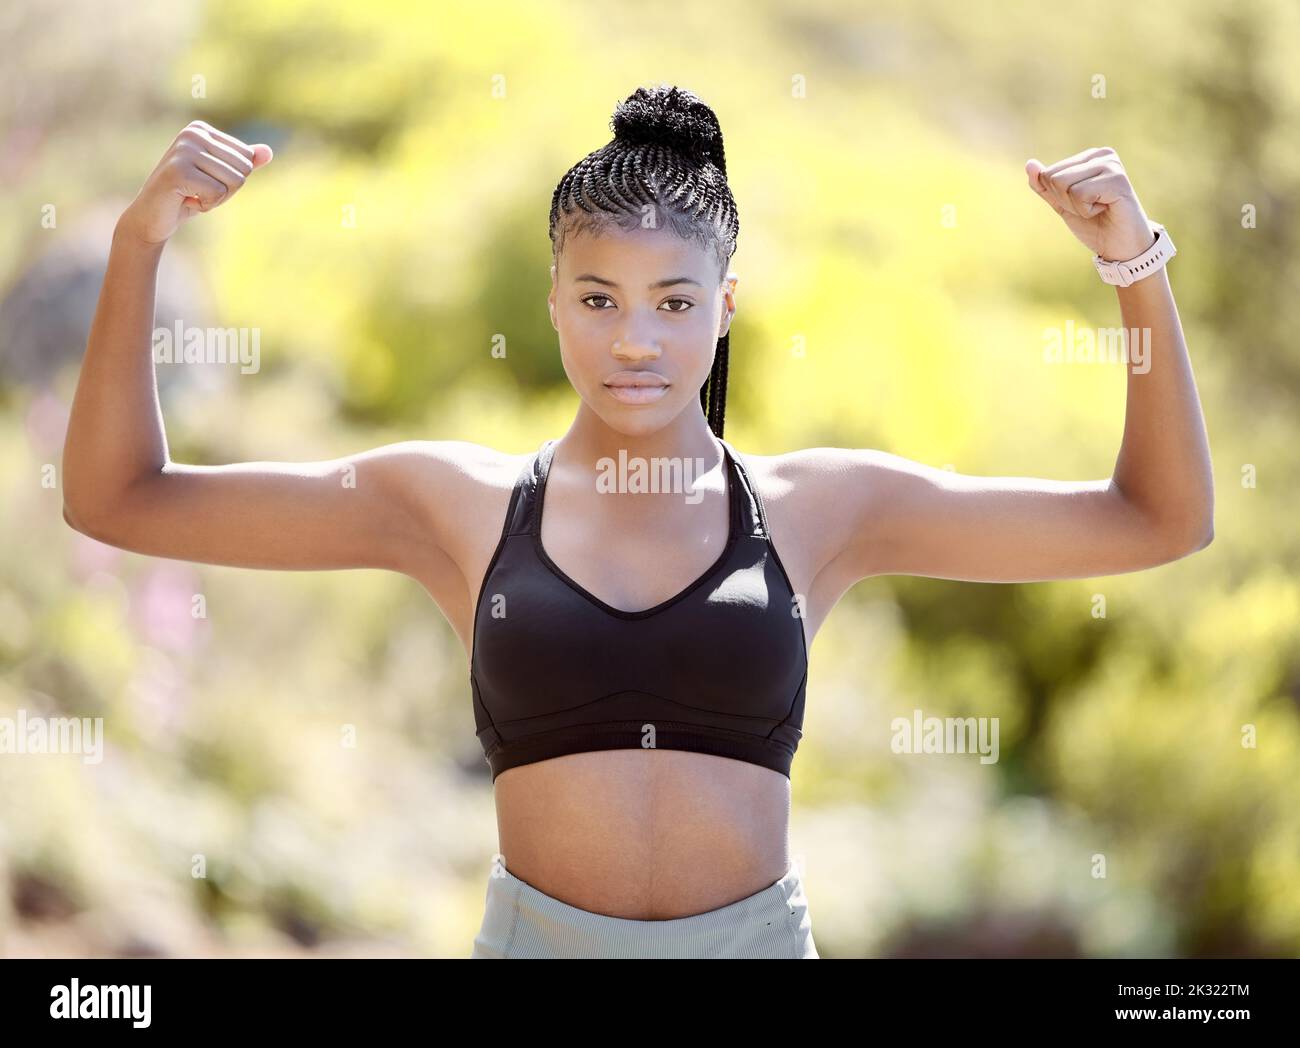 Fitness, strong arm muscles an black woman after a sports workout, training and exercise in nature. Portrait of a healthy female athlete with Stock Photo